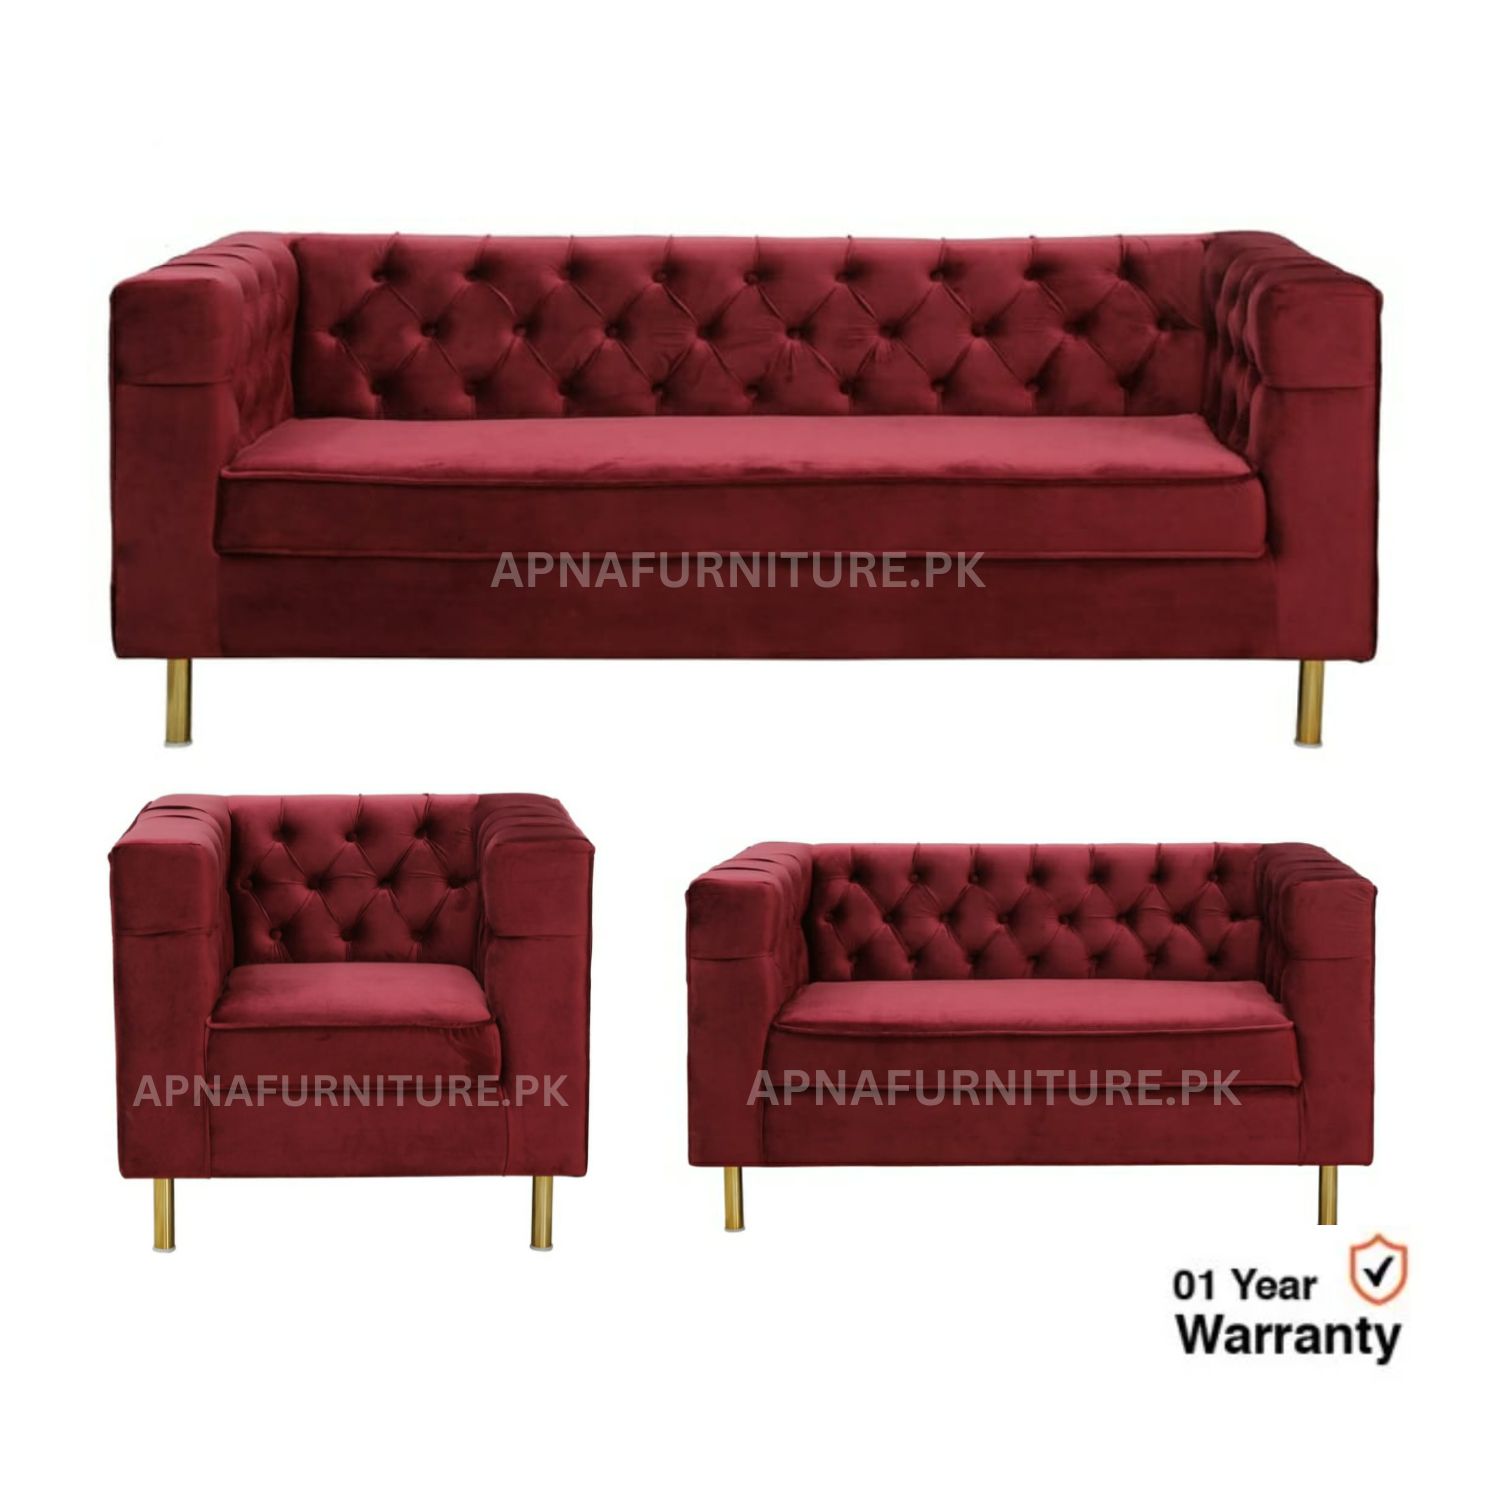 Bed Room Sofas Available For On